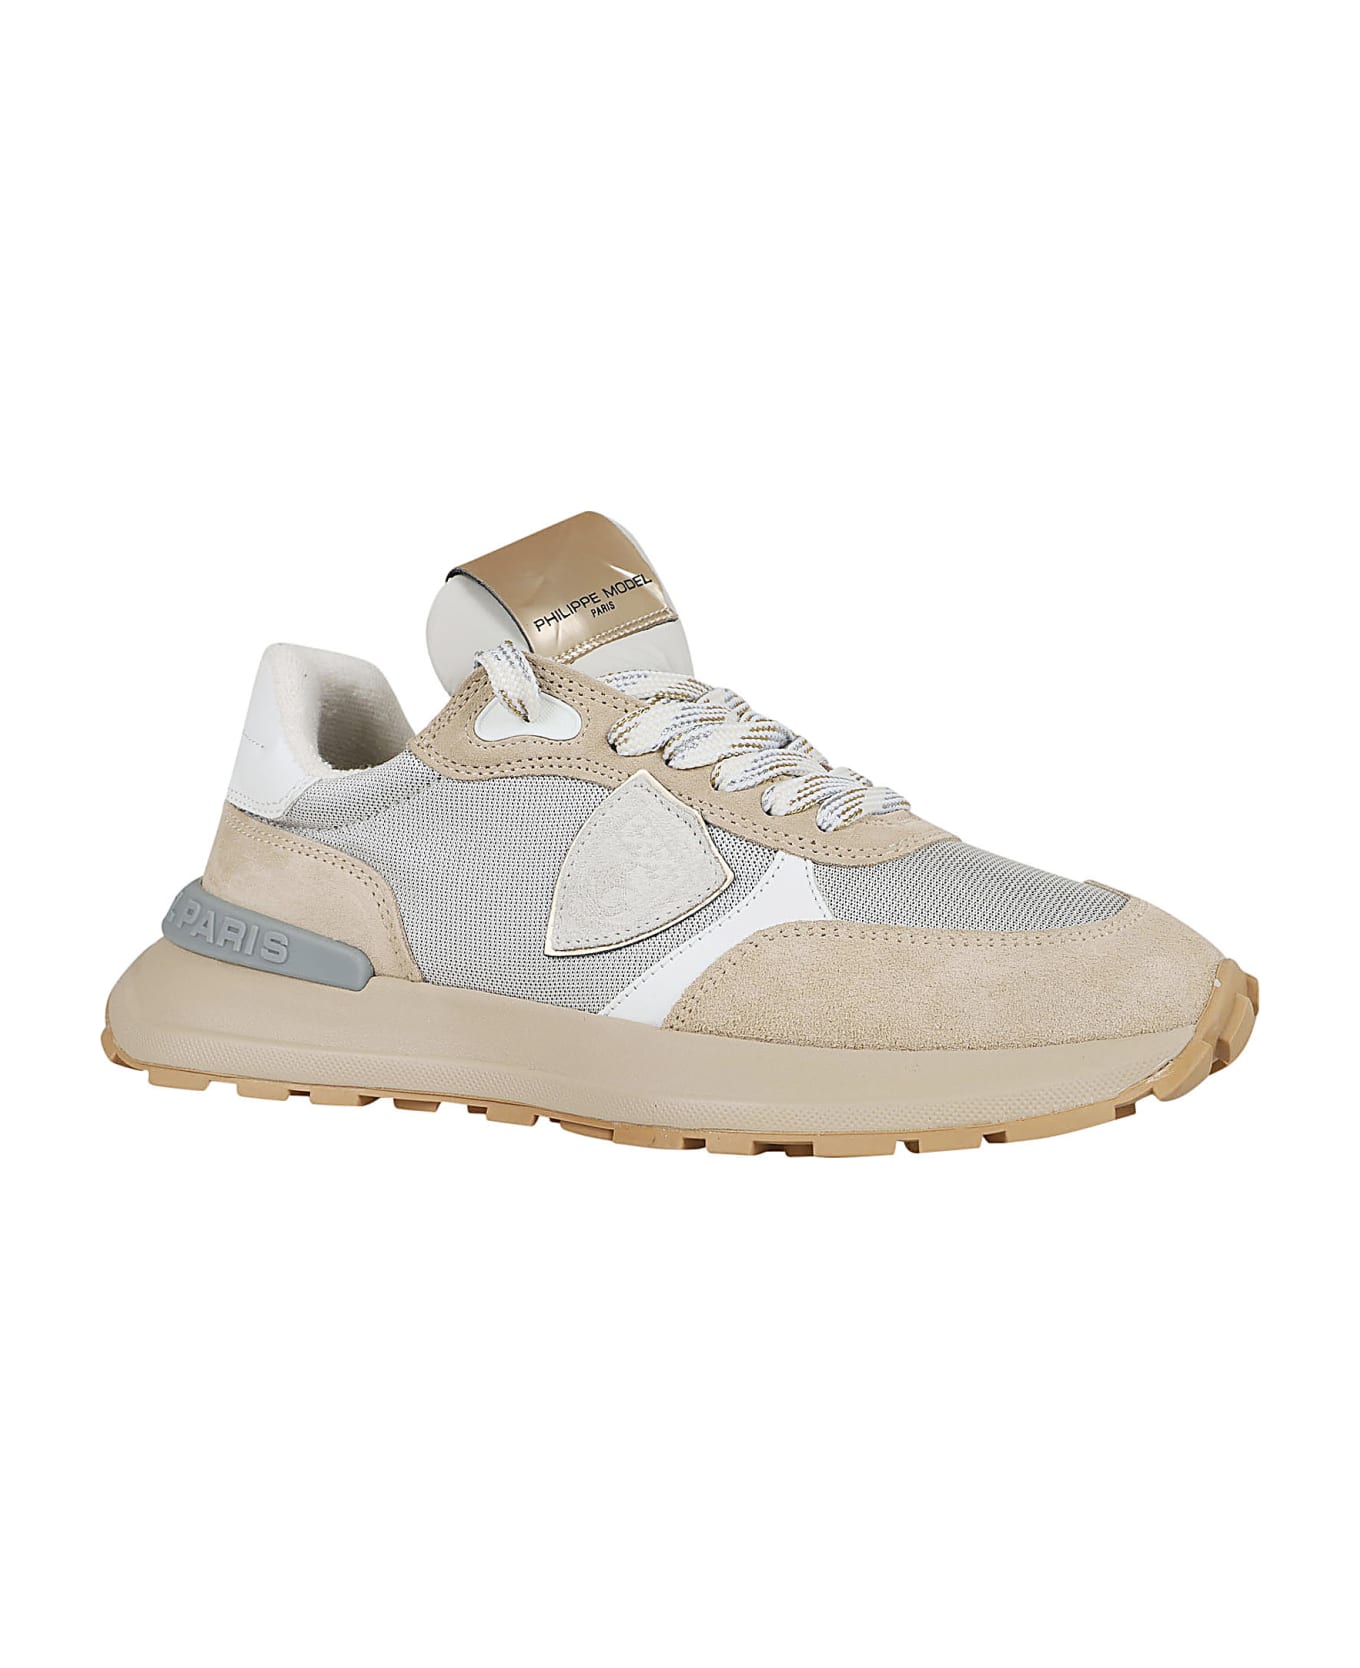 Philippe Model Antibes Low Woman - Air Max 2090 EOI SNEAKERS